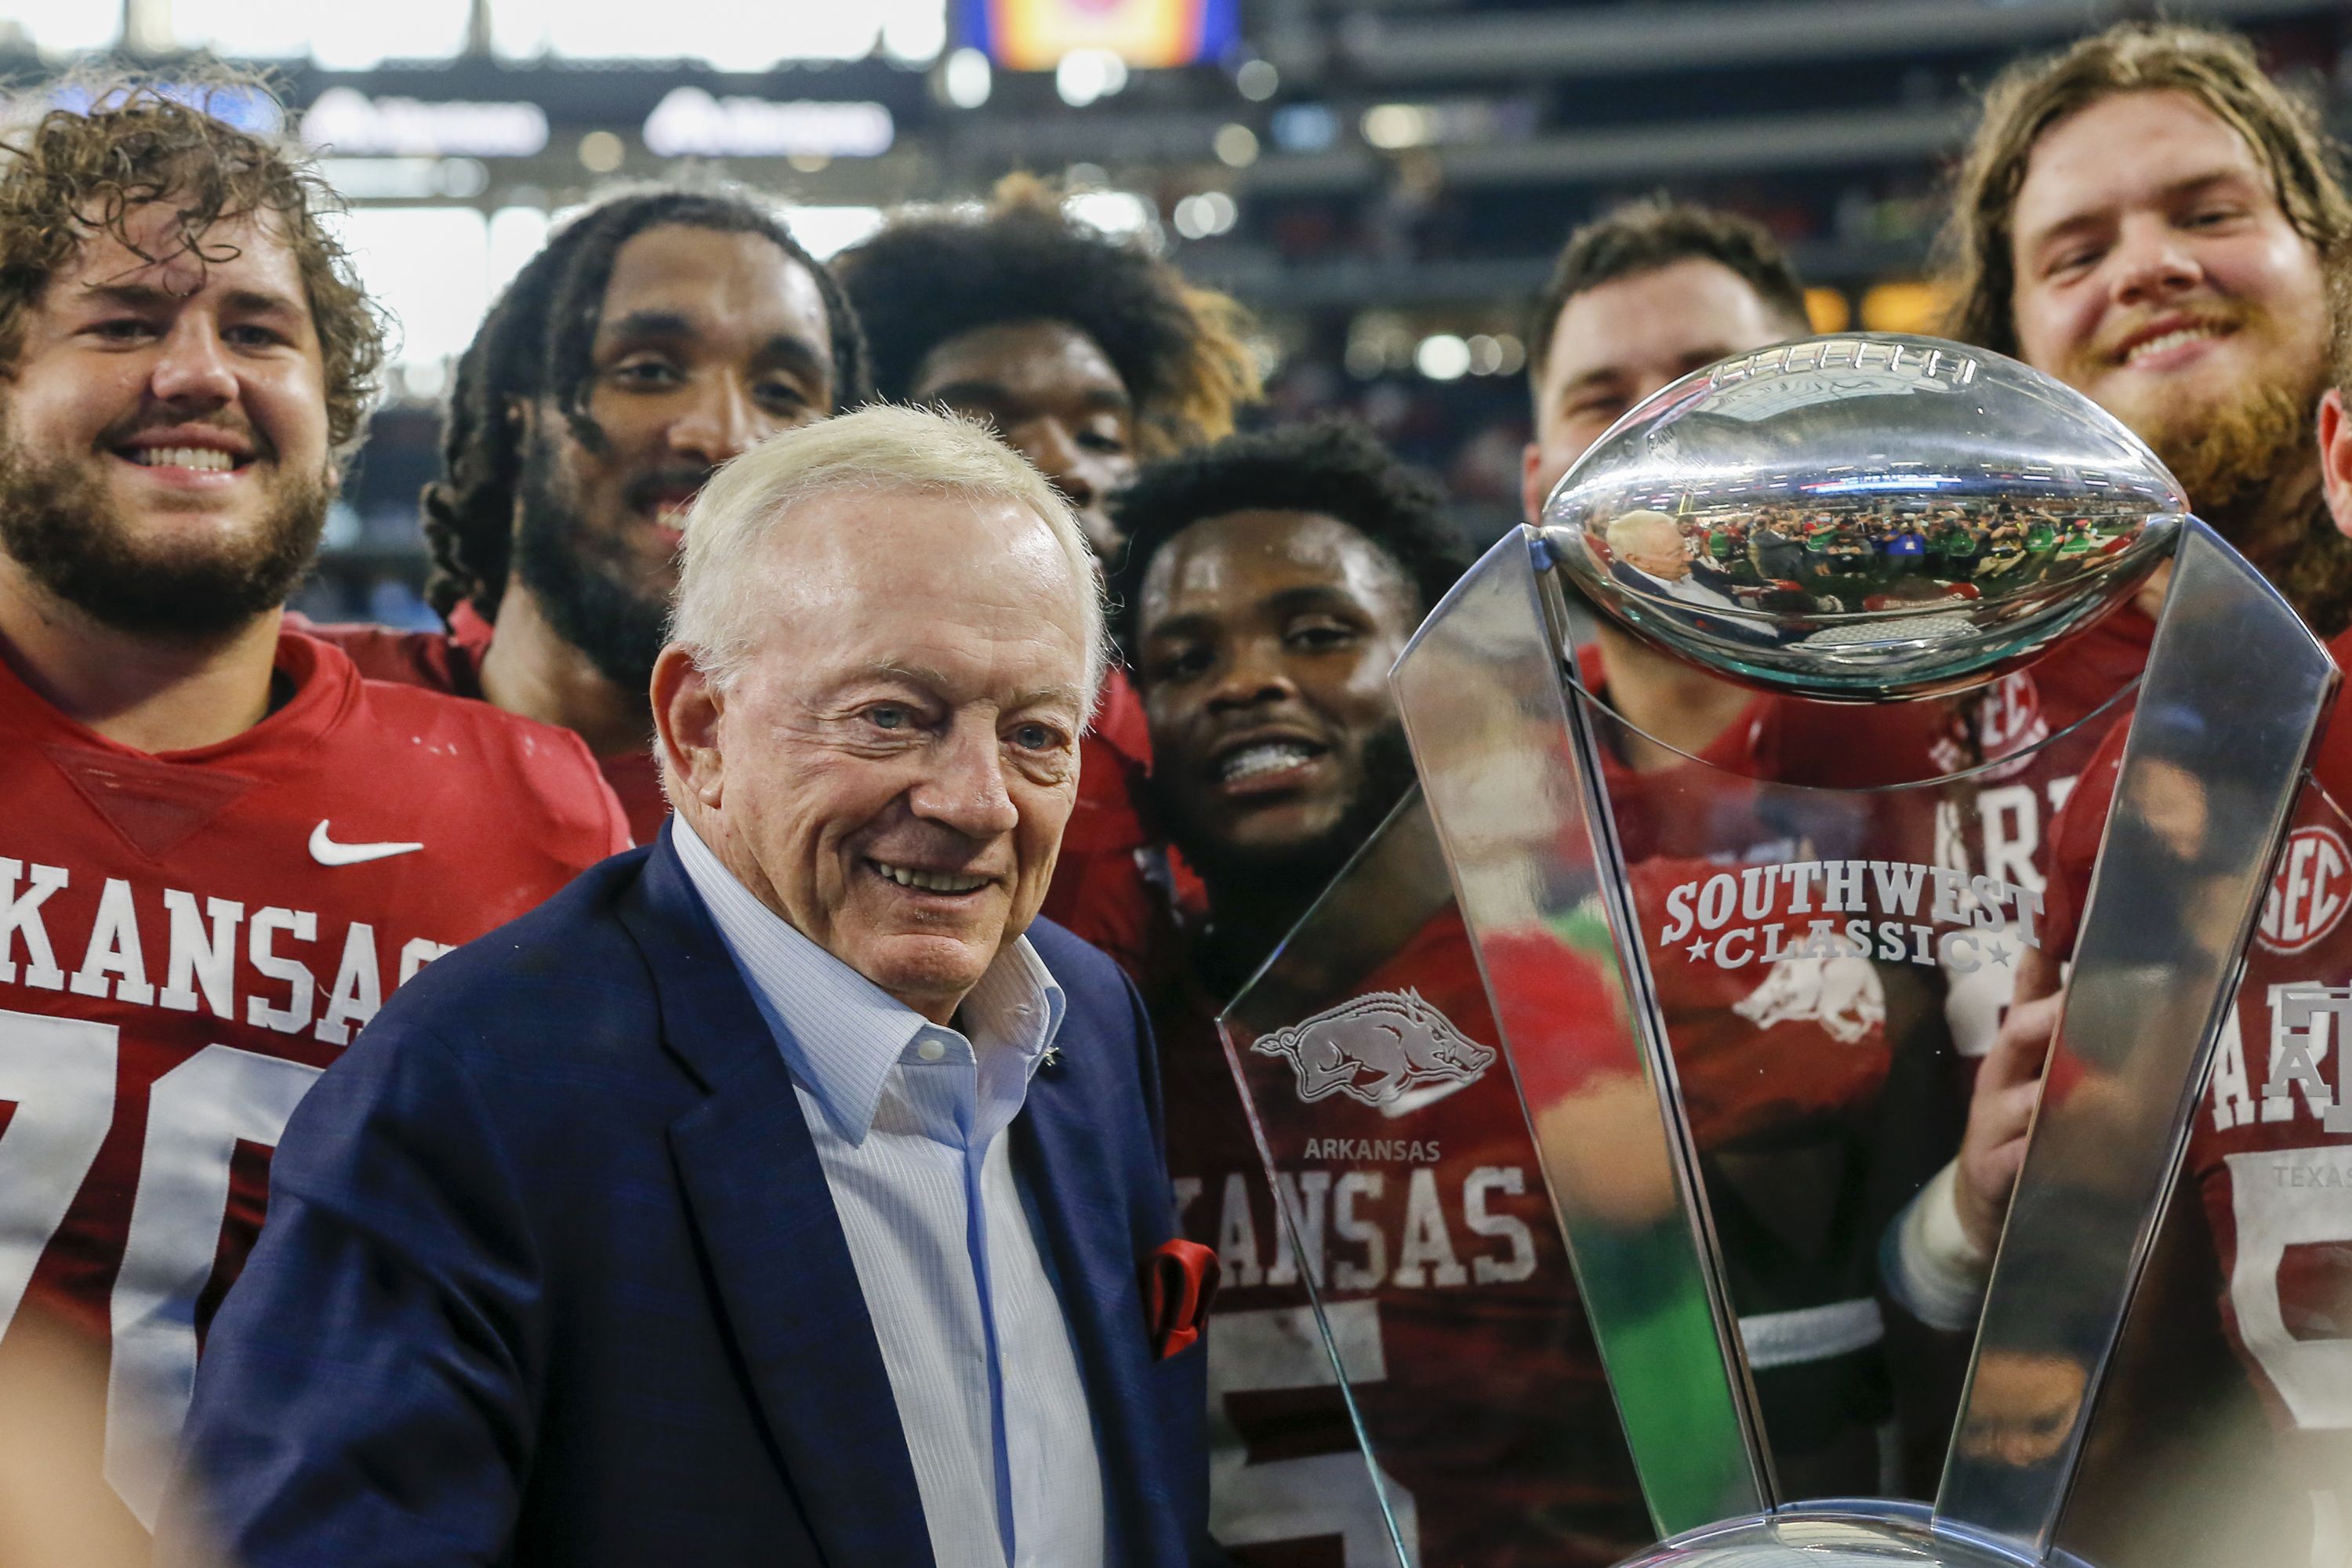 Dallas Cowboys owner Jerry Jones celebrates with the Arkansas Razorbacks players after winning Southwest Classic game between the Texas A&M Aggies.